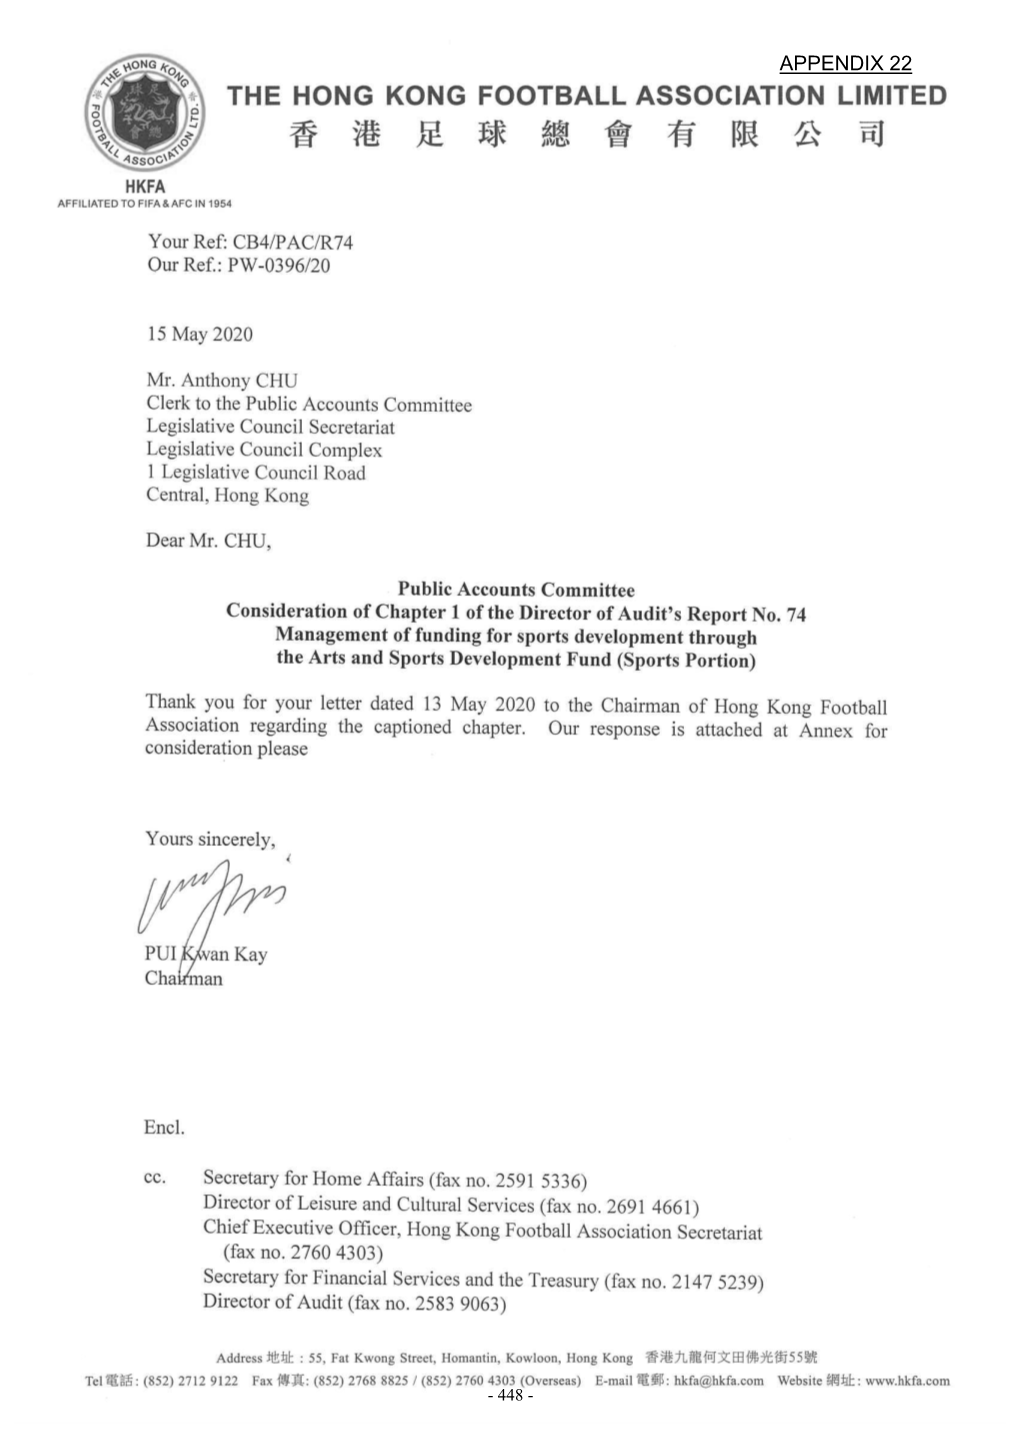 Letter Dated 15 May 2020 from Chairman, Hong Kong Football